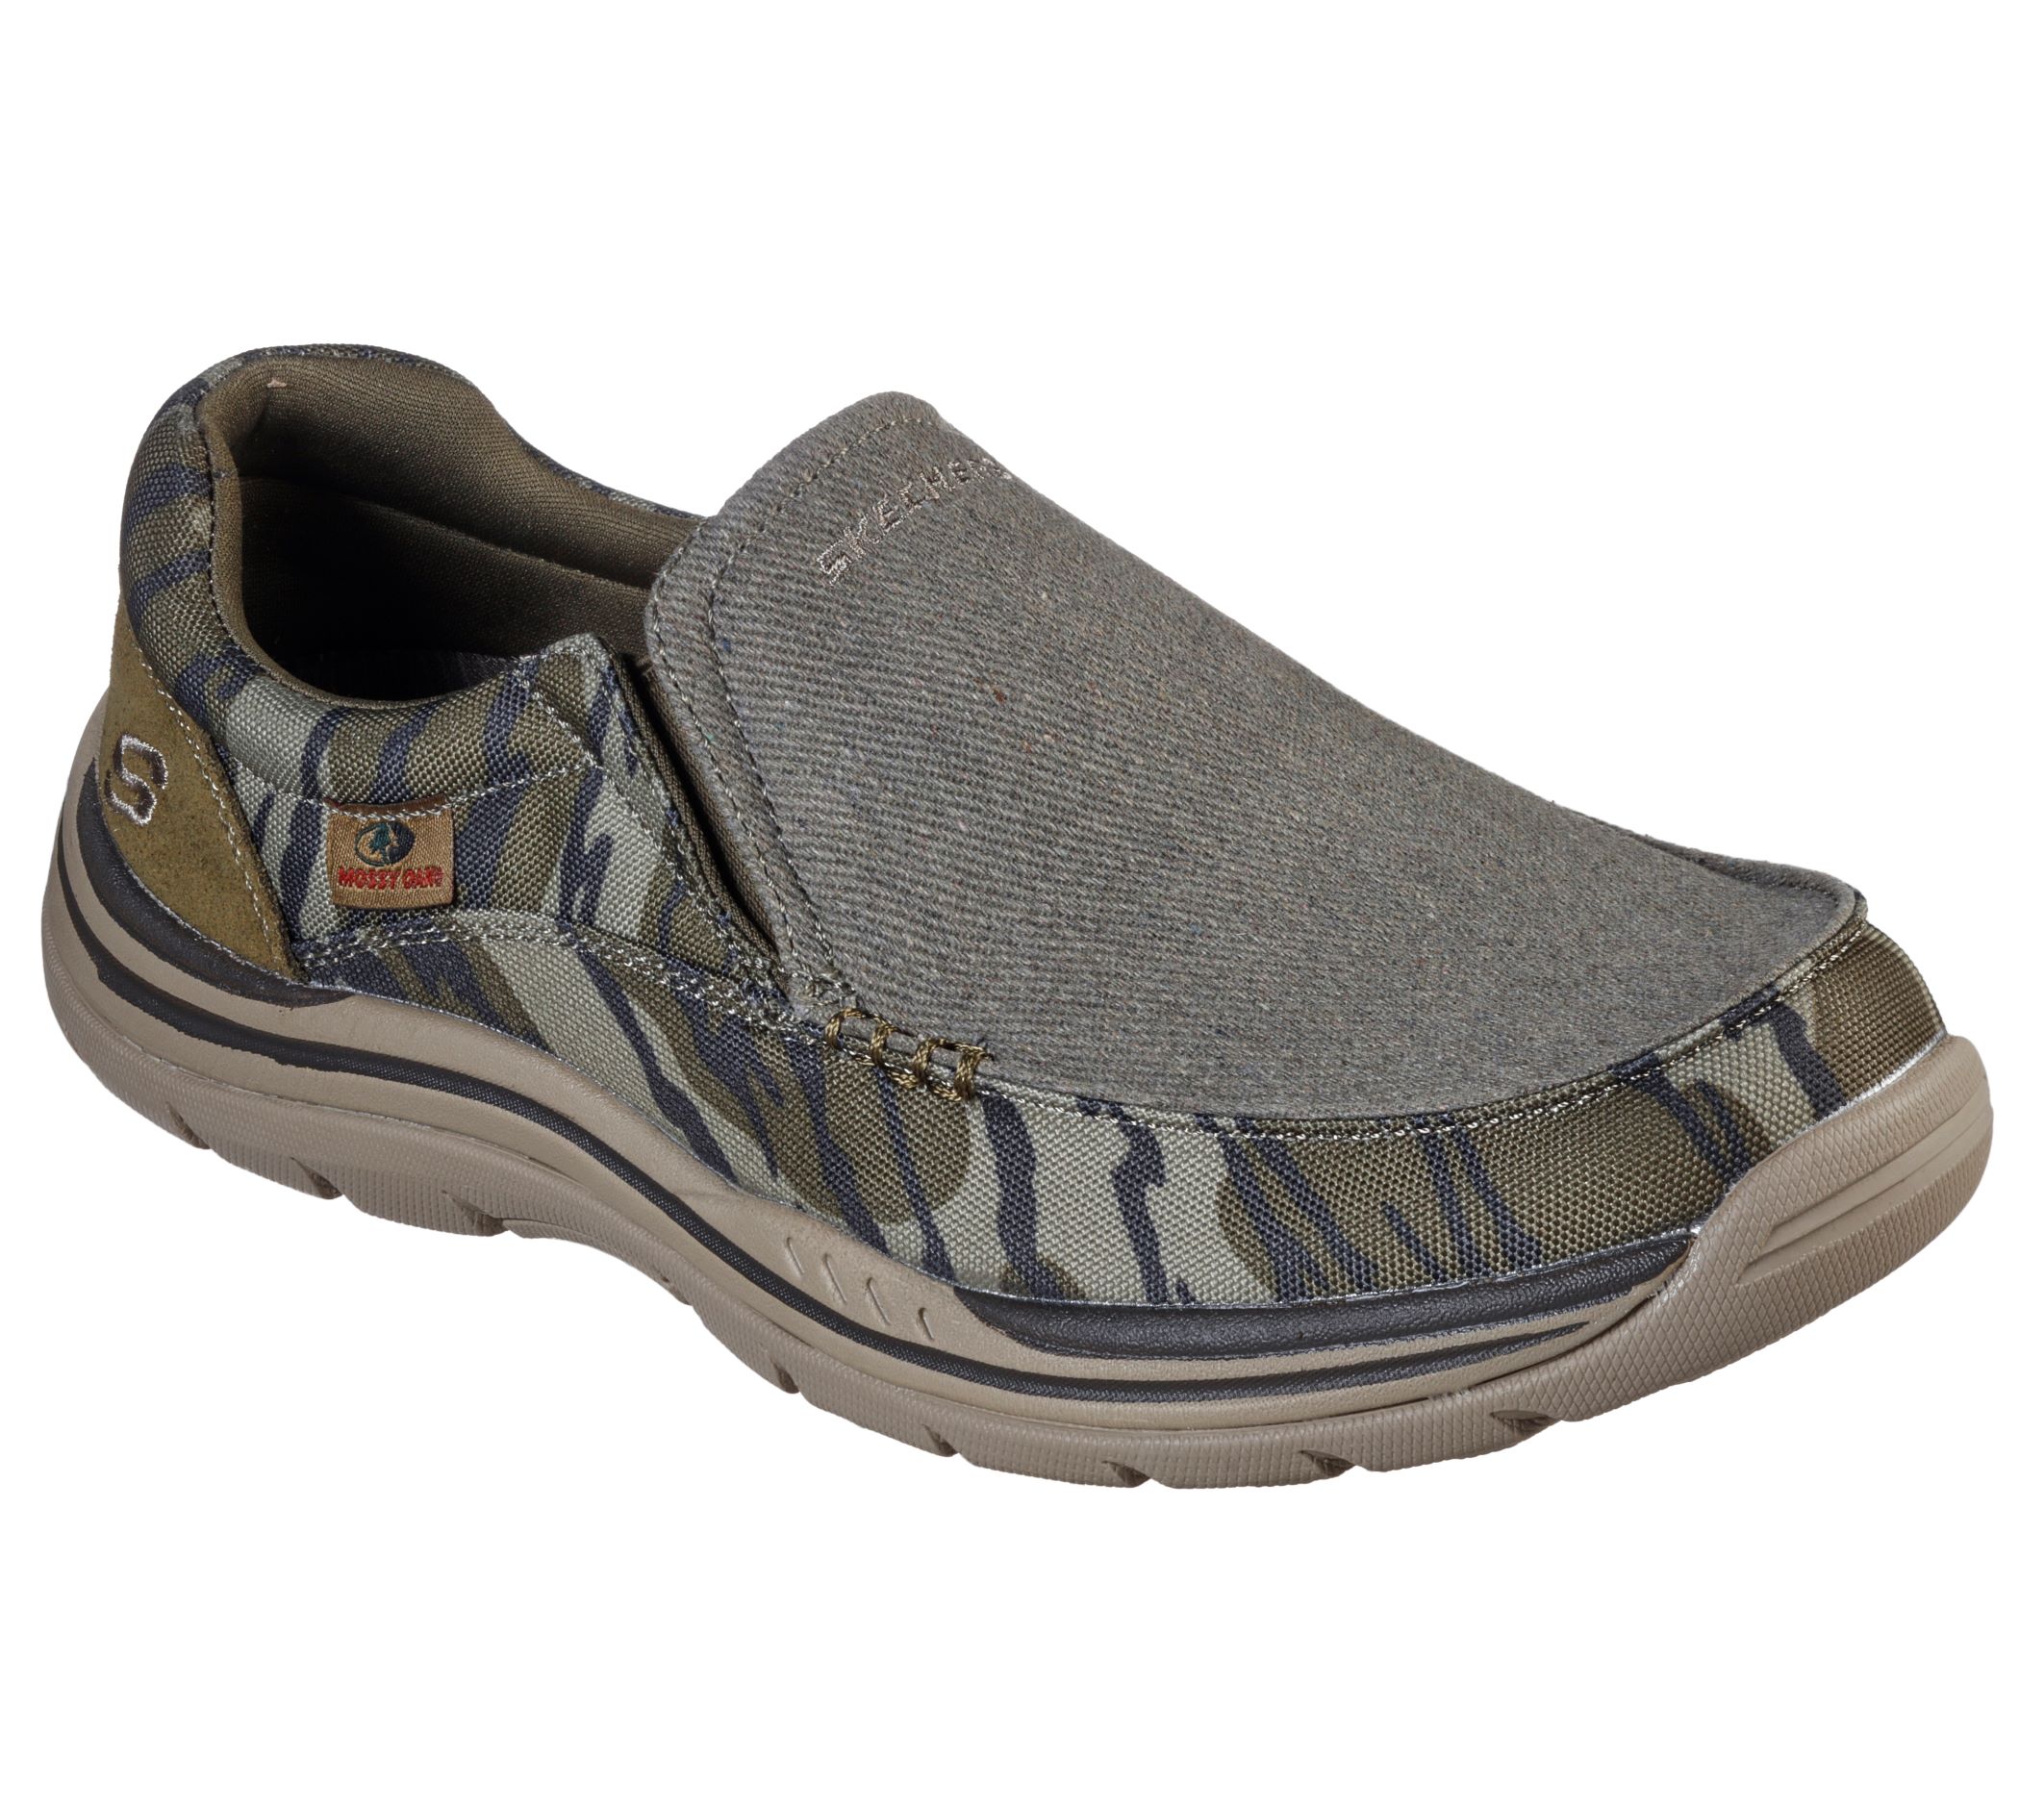 Skechers Men's Relaxed Fit Expected Avillo Casual Slip-on Shoe (Wide Width Available) - image 1 of 5